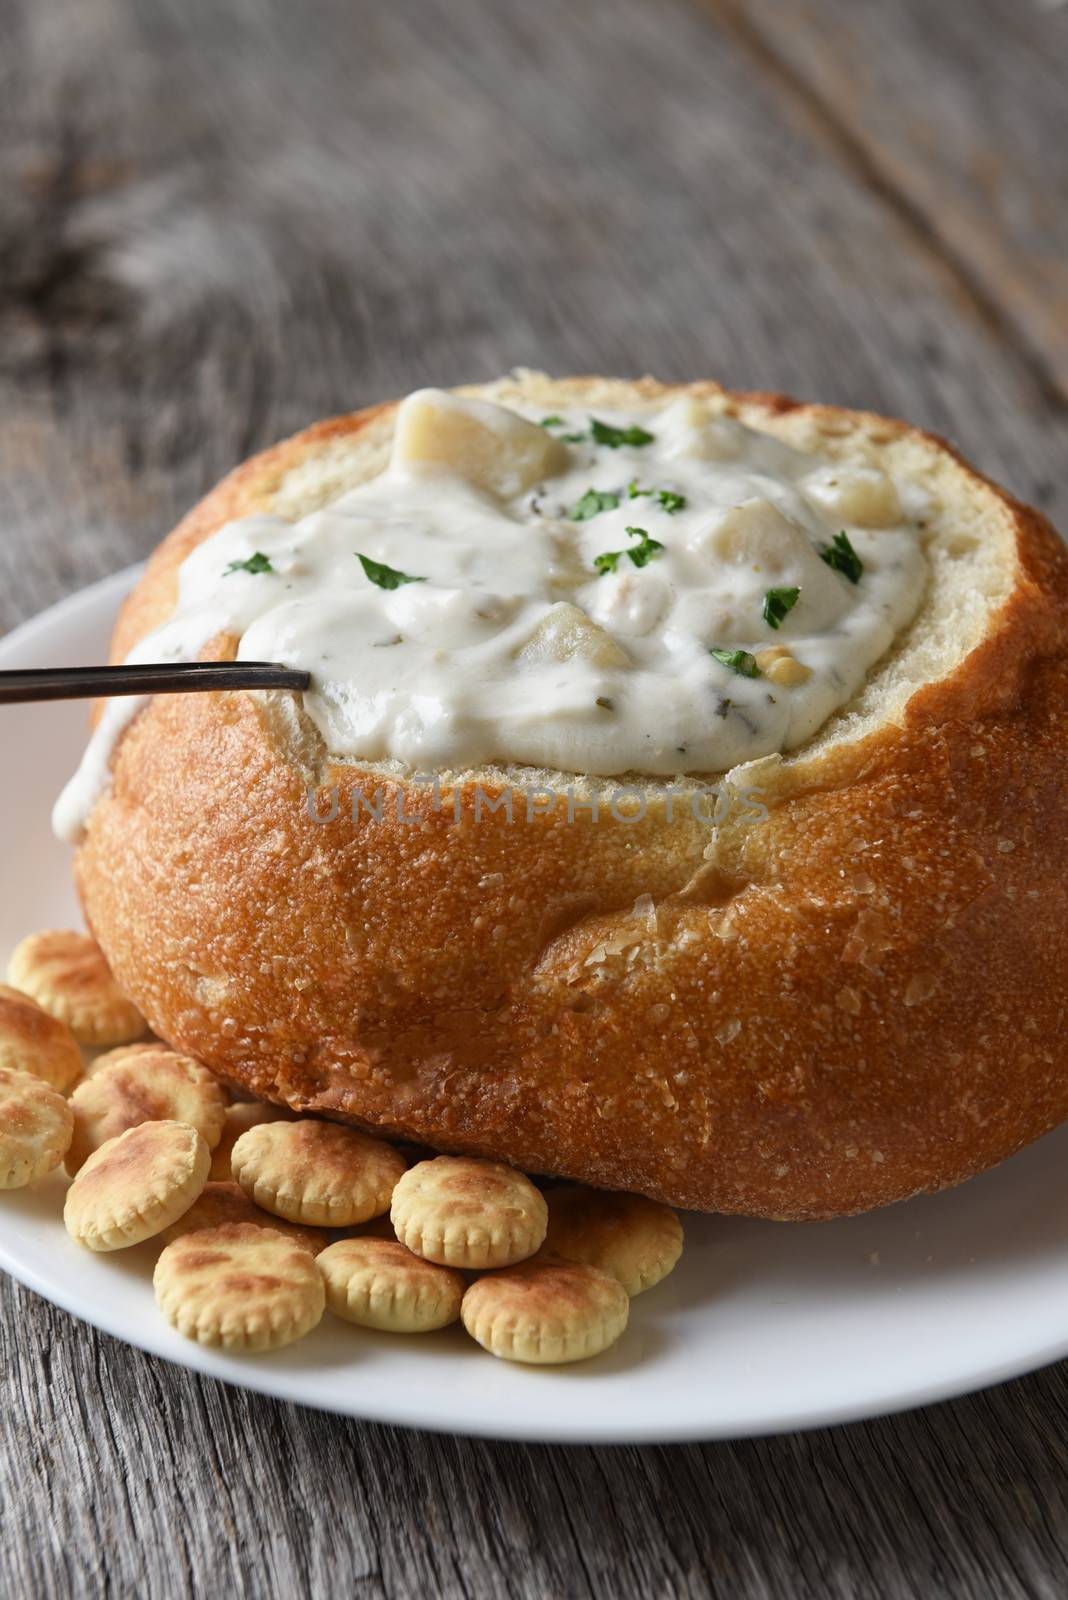 Vertical closeup of a bread bowl of New England Clam Chowder on a rustic wood table with a spoon and oyster crackers.